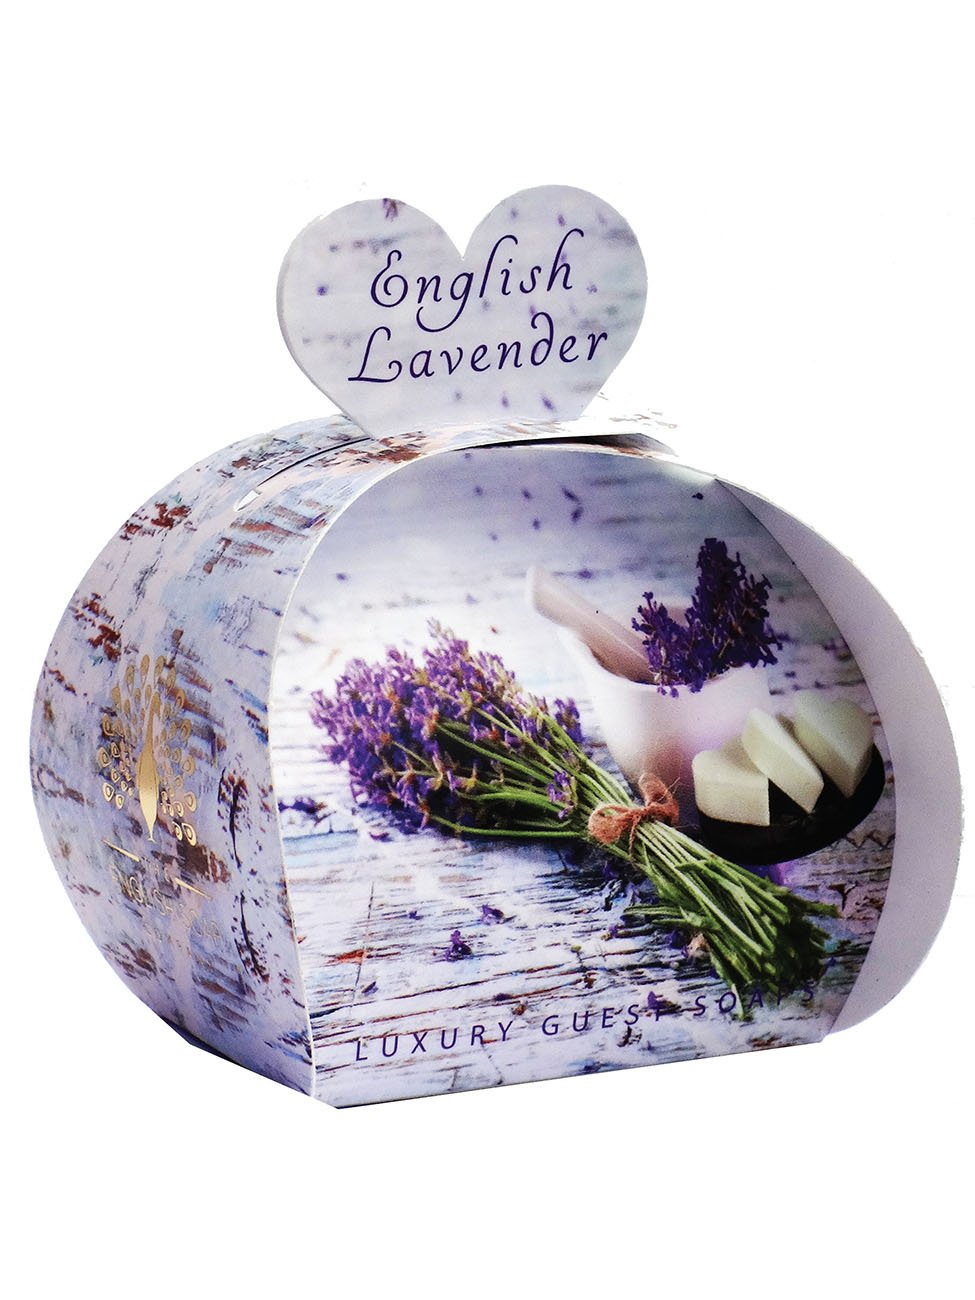 A decorative, oval-shaped box with a lavender theme, labeled "The English Soap Co. English Lavender Luxury Guest Soaps." The box is designed with images of purple lavender flowers and triple milled soap bars.